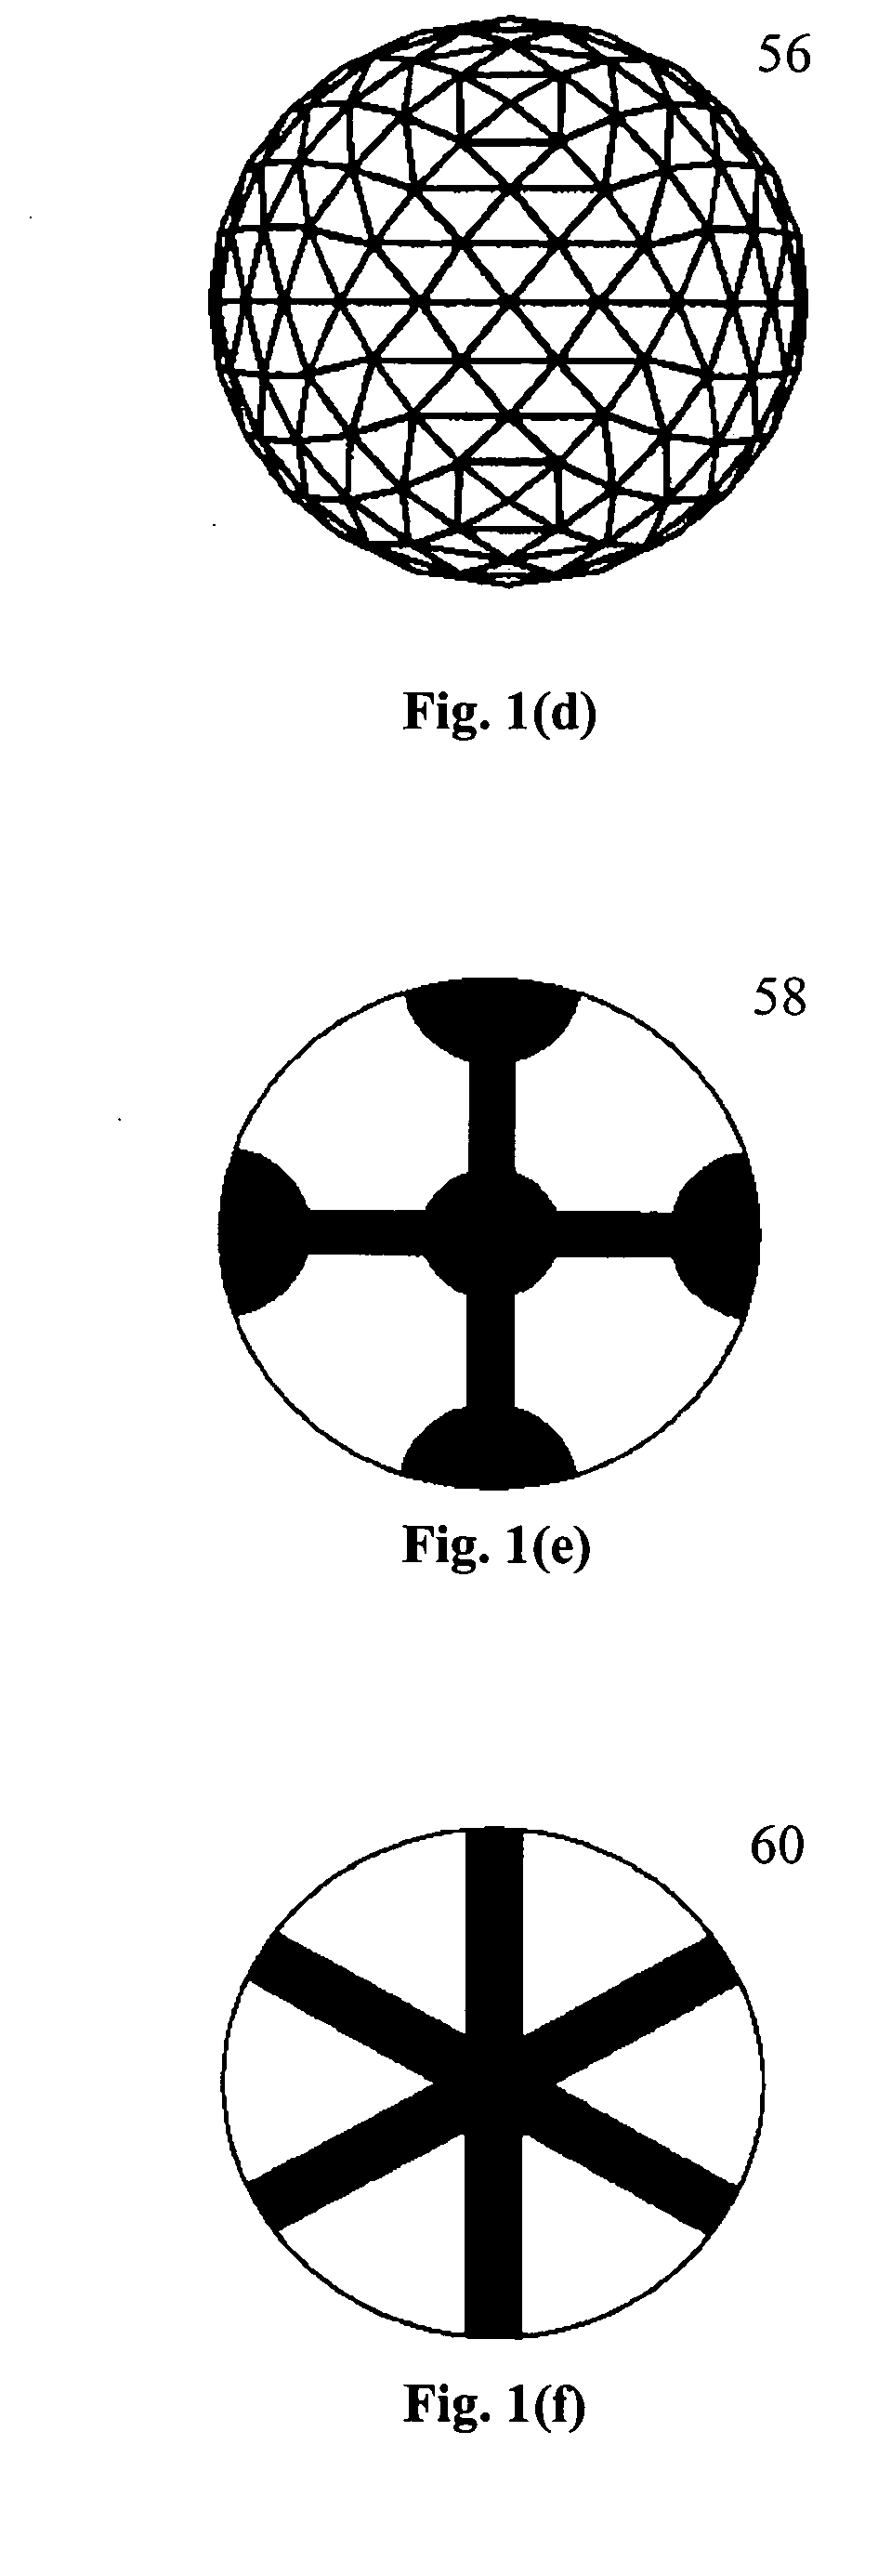 Multi-layer golf ball having improved inter-layer adhesion via induction heating